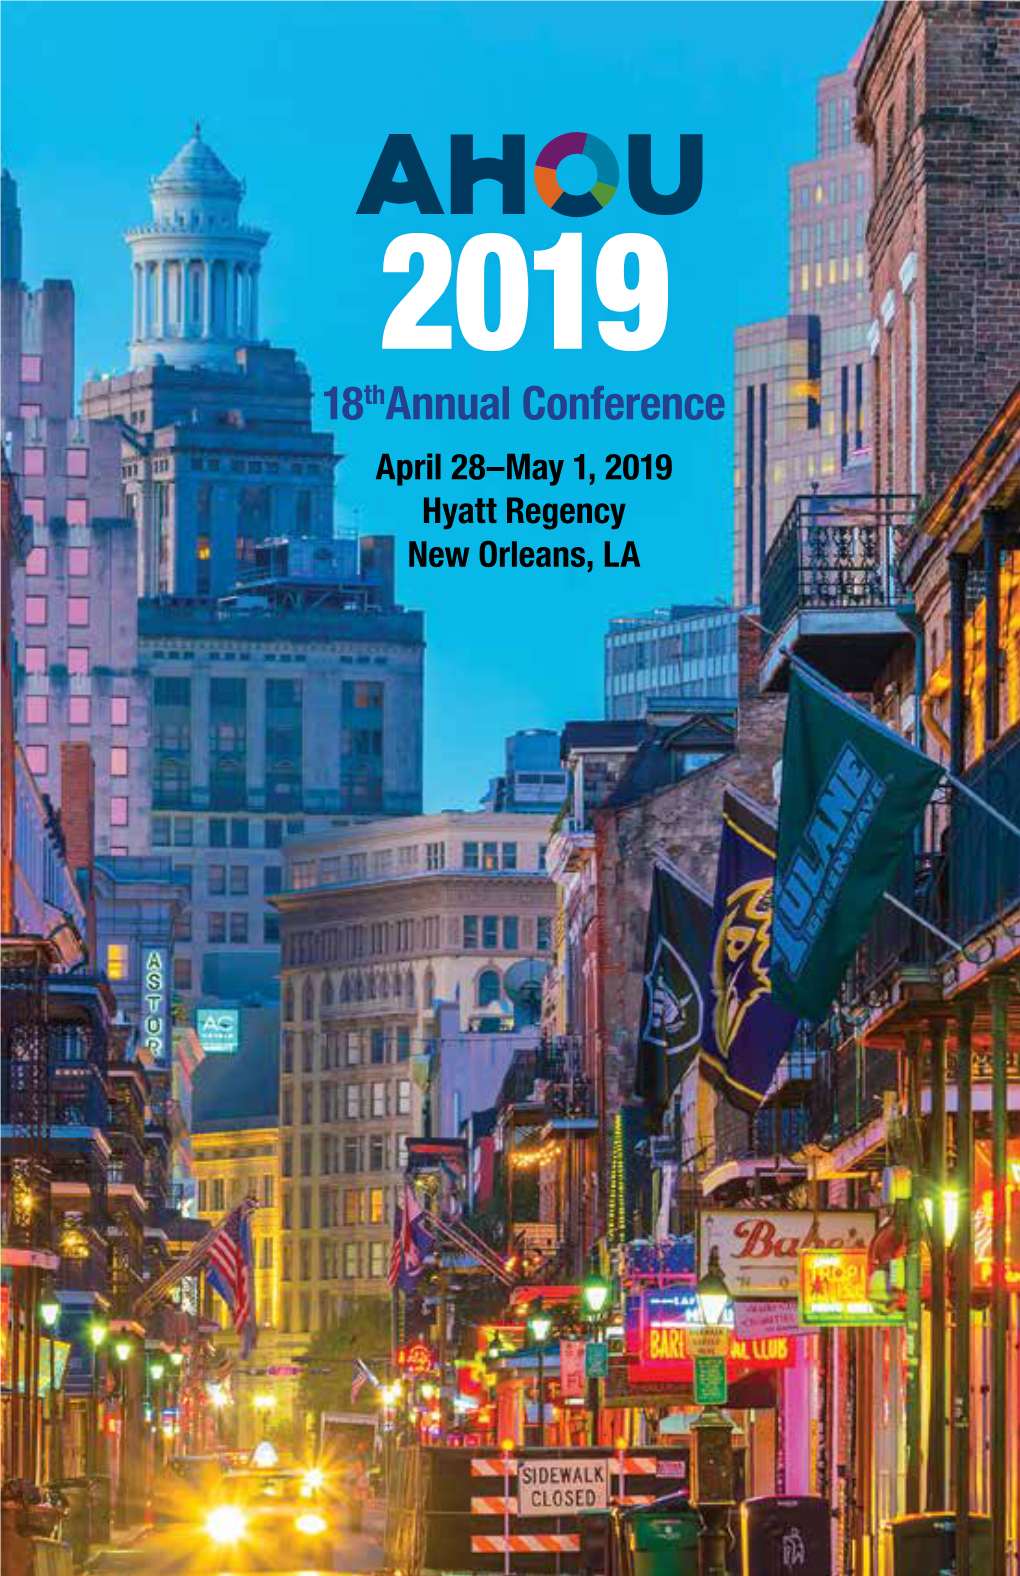 18Thannual Conference April 28–May 1, 2019 Hyatt Regency New Orleans, LA 18Th Annual AHOU Conference